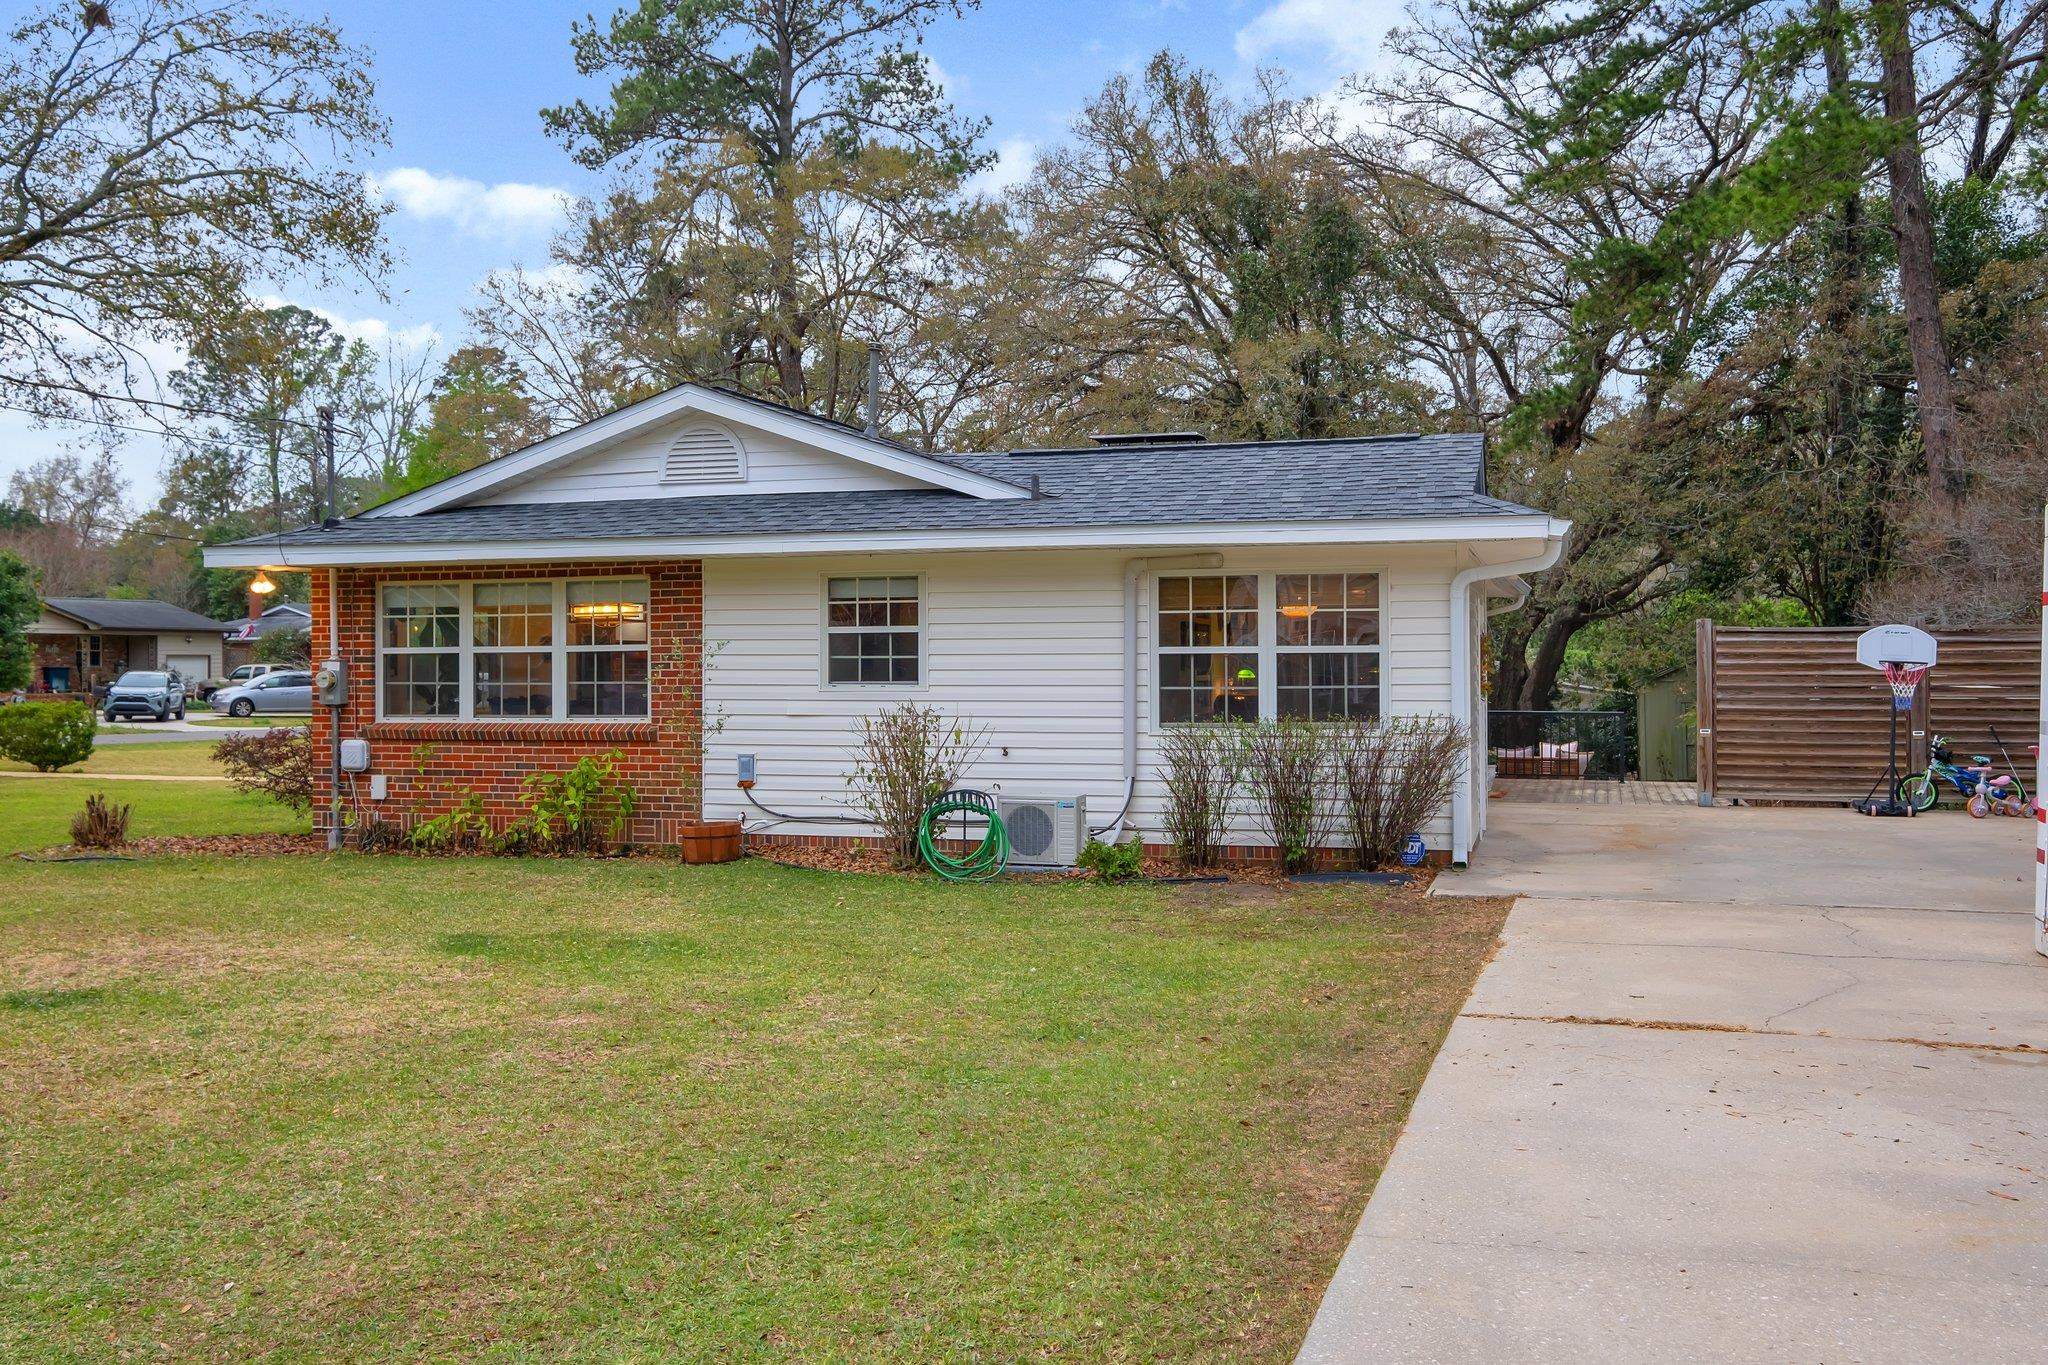 1416 Frederick Drive,TALLAHASSEE,Florida 32308,3 Bedrooms Bedrooms,2 BathroomsBathrooms,Detached single family,1416 Frederick Drive,369196